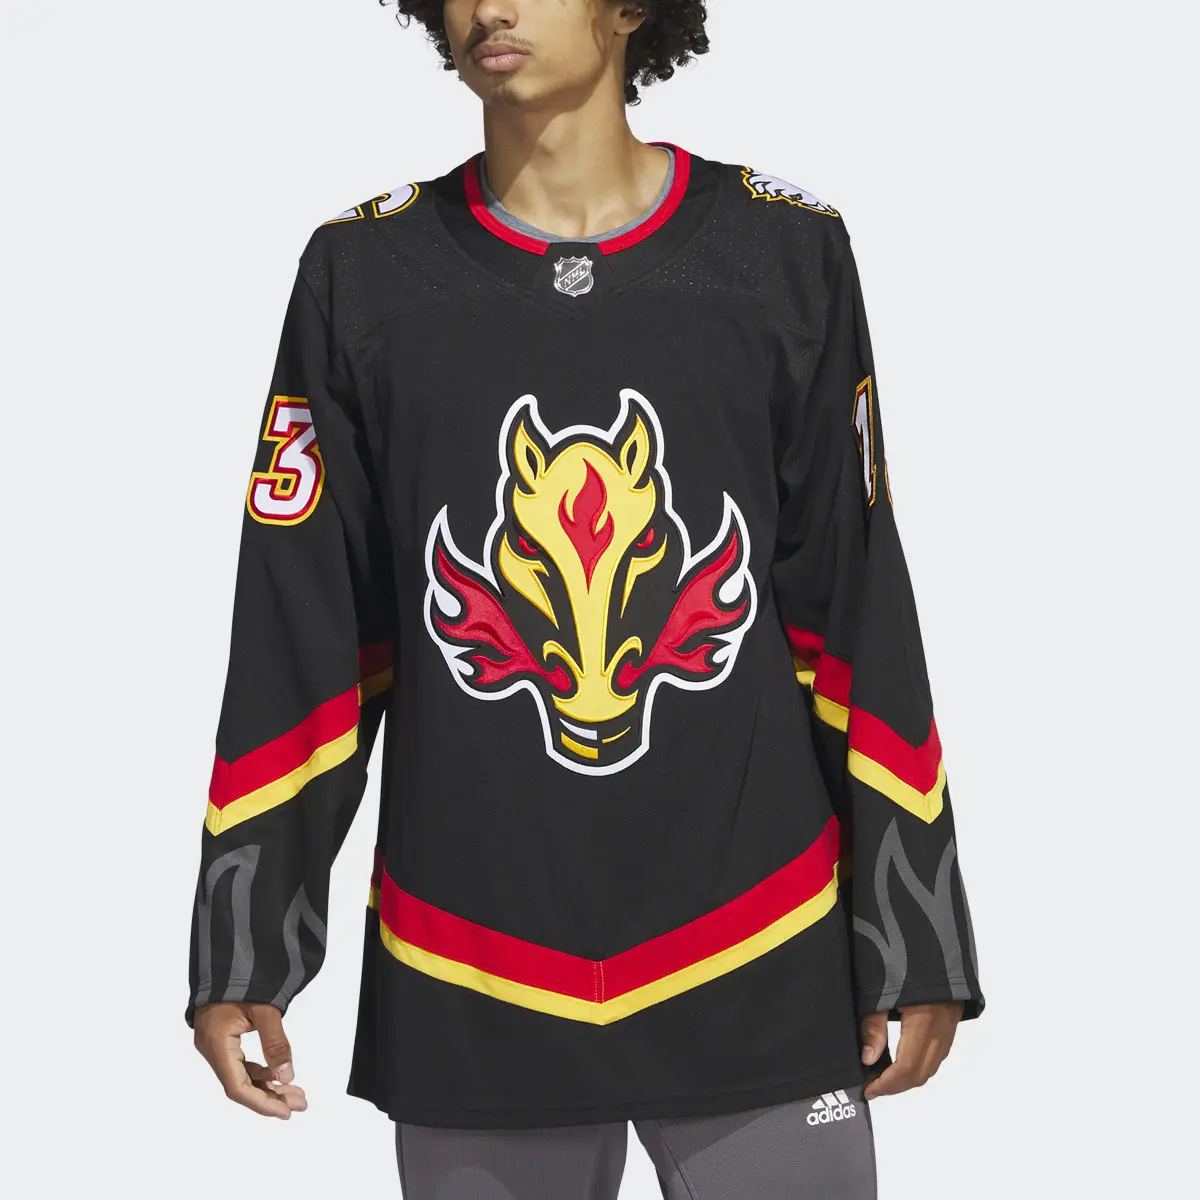 Adidas Flames Gaudreau Third Authentic Jersey. 1